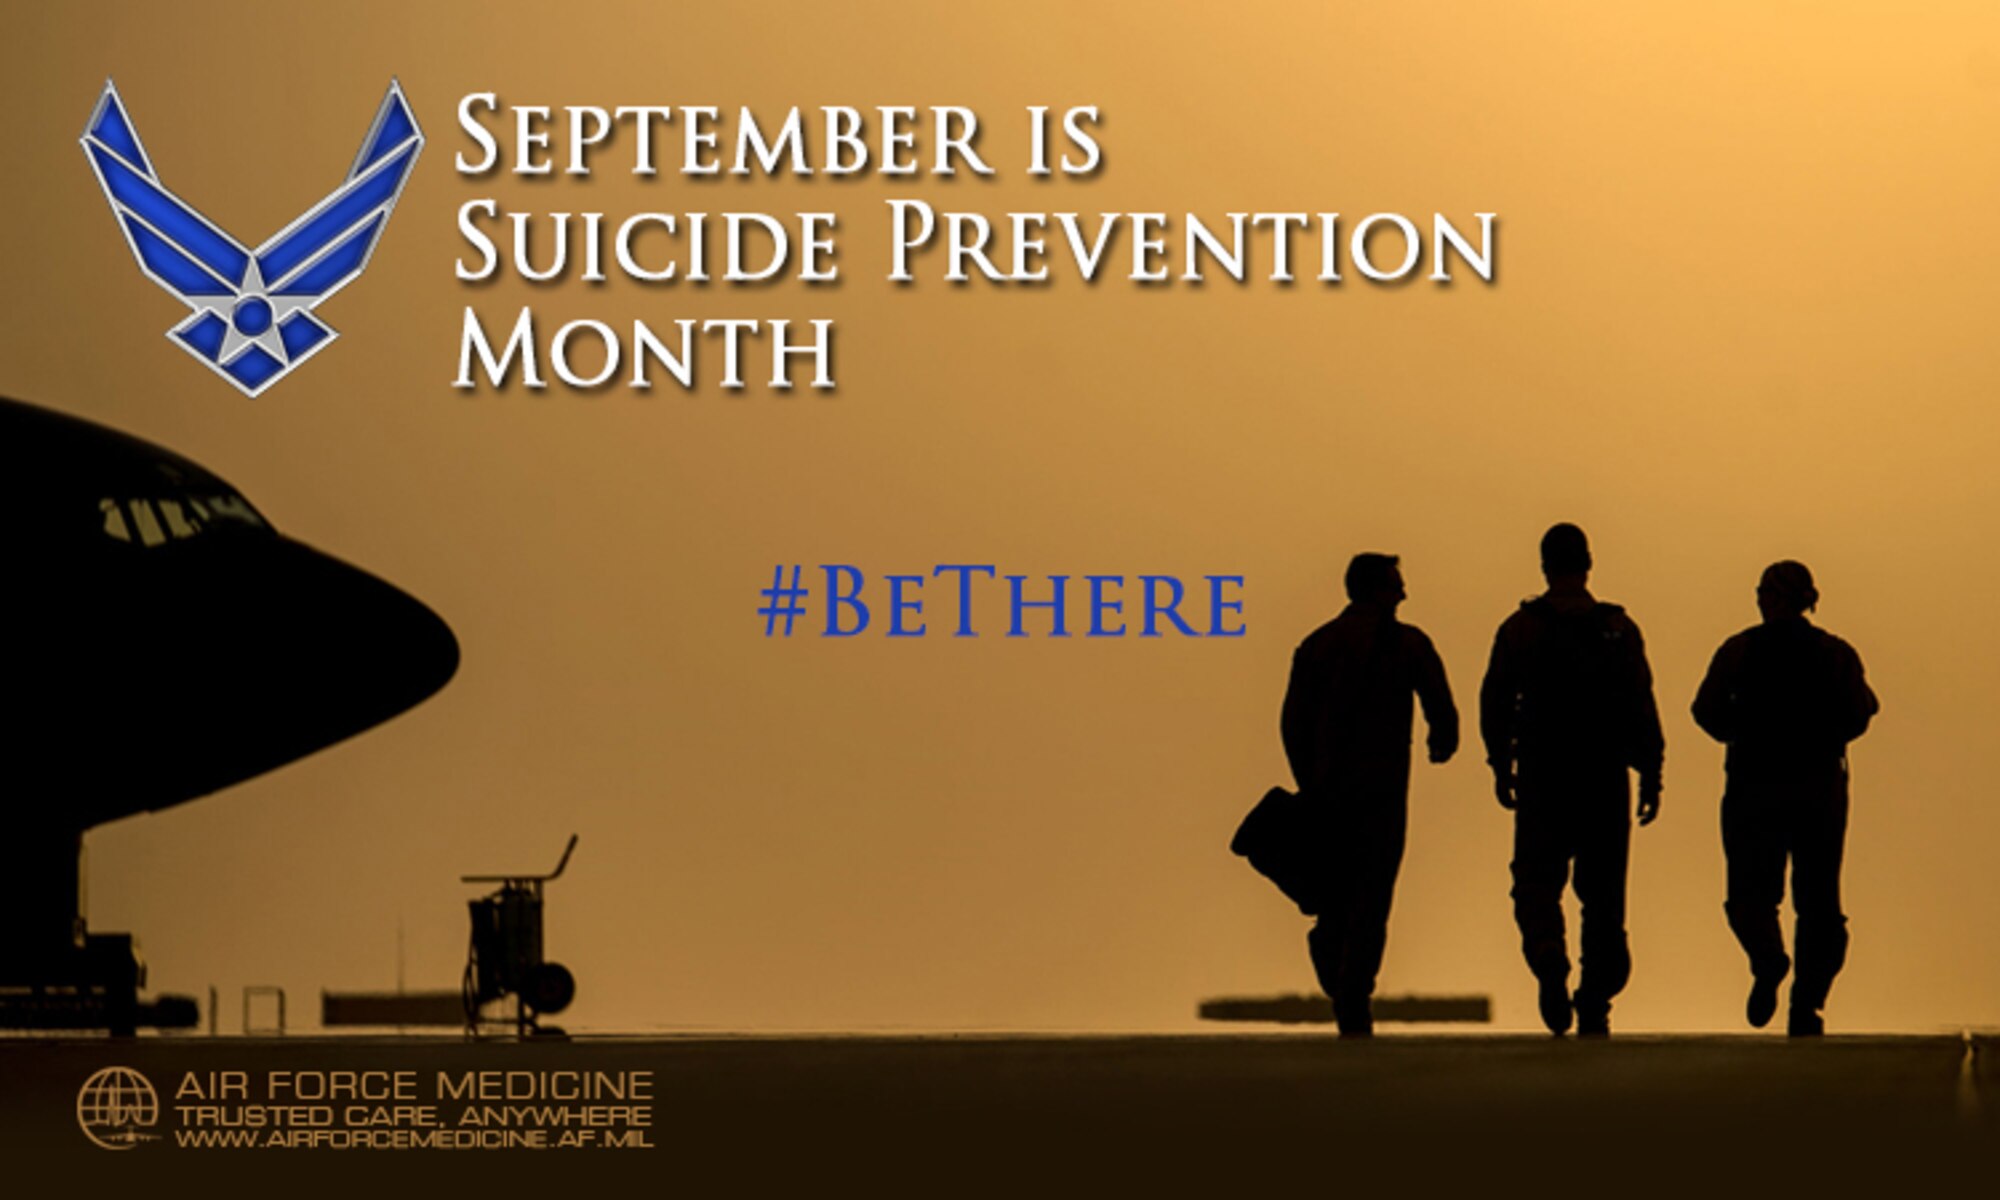 Be there: preventing suicide is everyone’s duty